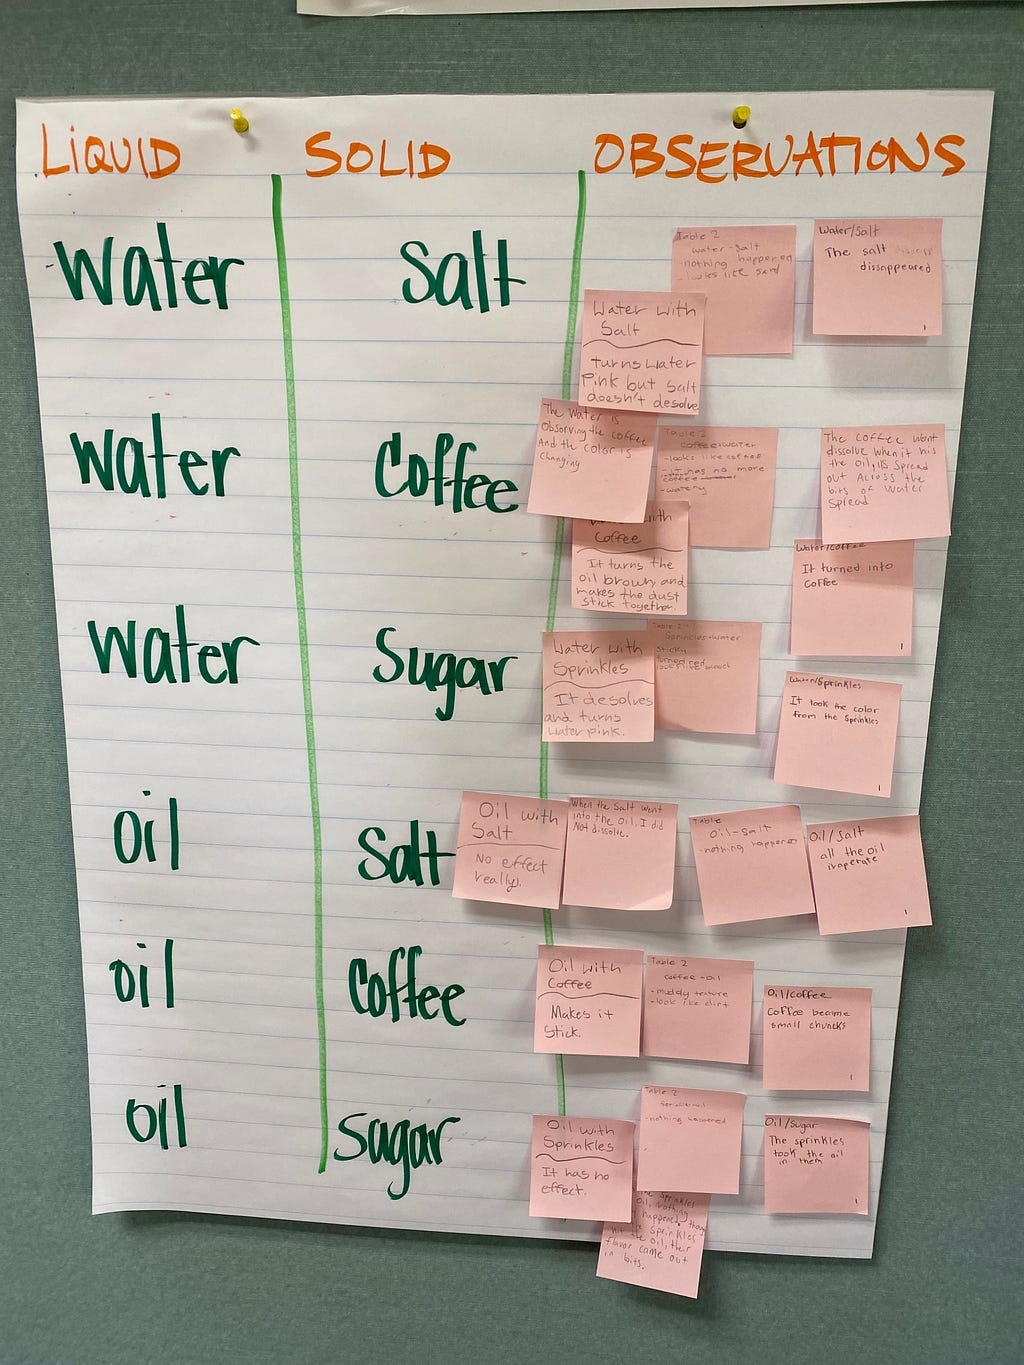 Concept map of solids, liquids and student observations of objects that dissolved into each substance.